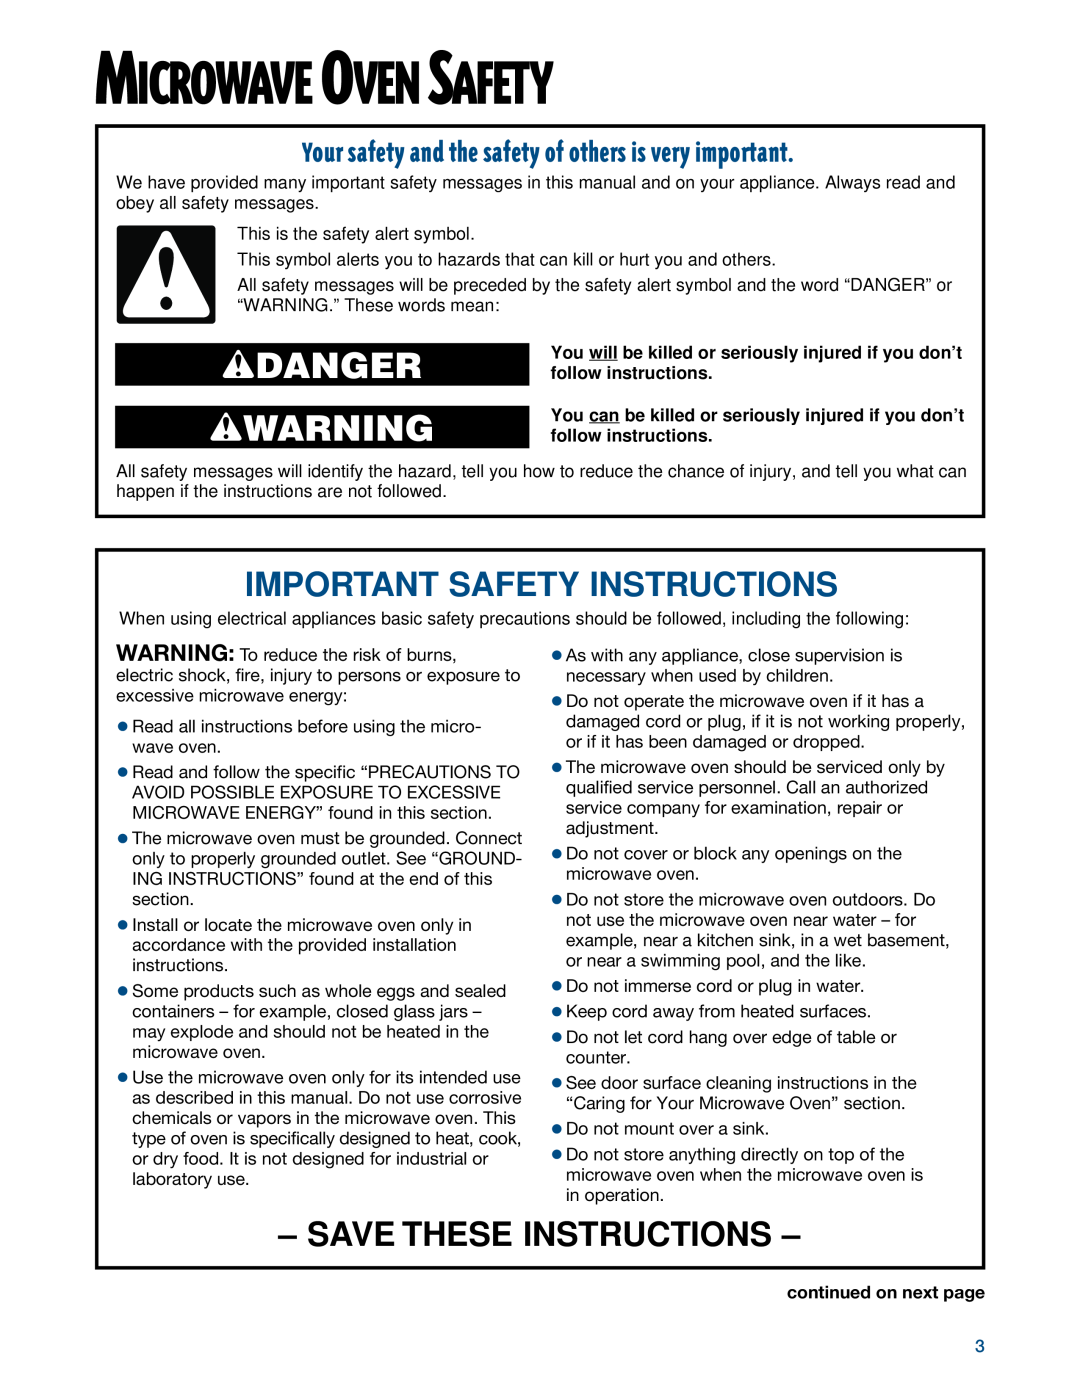 Whirlpool MHE14RF wDANGER wWARNING, Save These Instructions, Microwave Oven Safety, Important Safety Instructions 